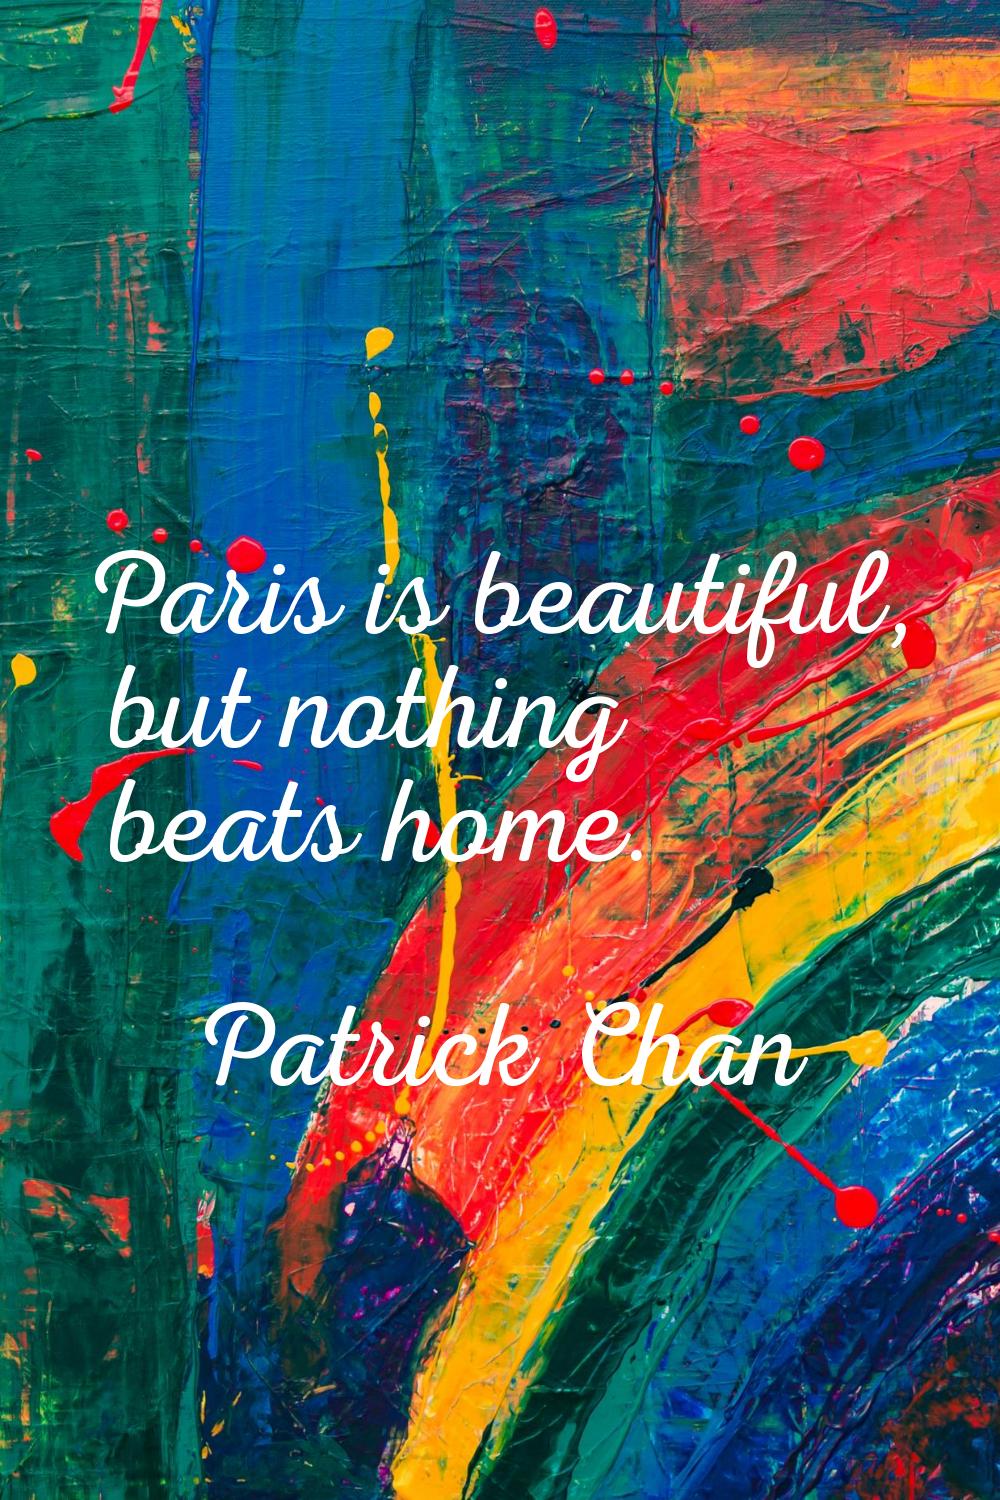 Paris is beautiful, but nothing beats home.